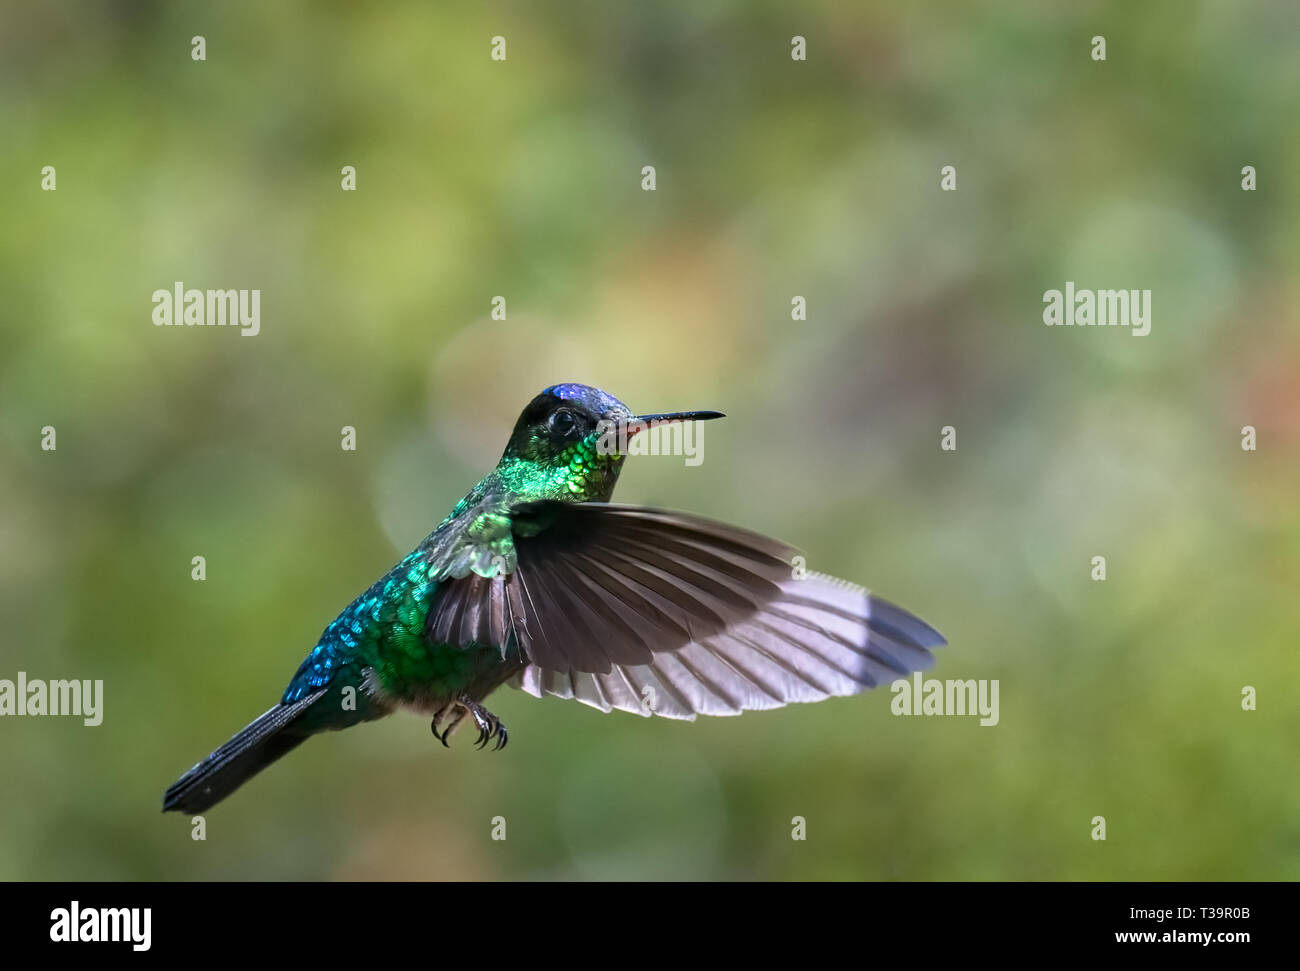 Hovering in place a Fiery-throated Hummingbird looks to the right as the wing swept forward Stock Photo